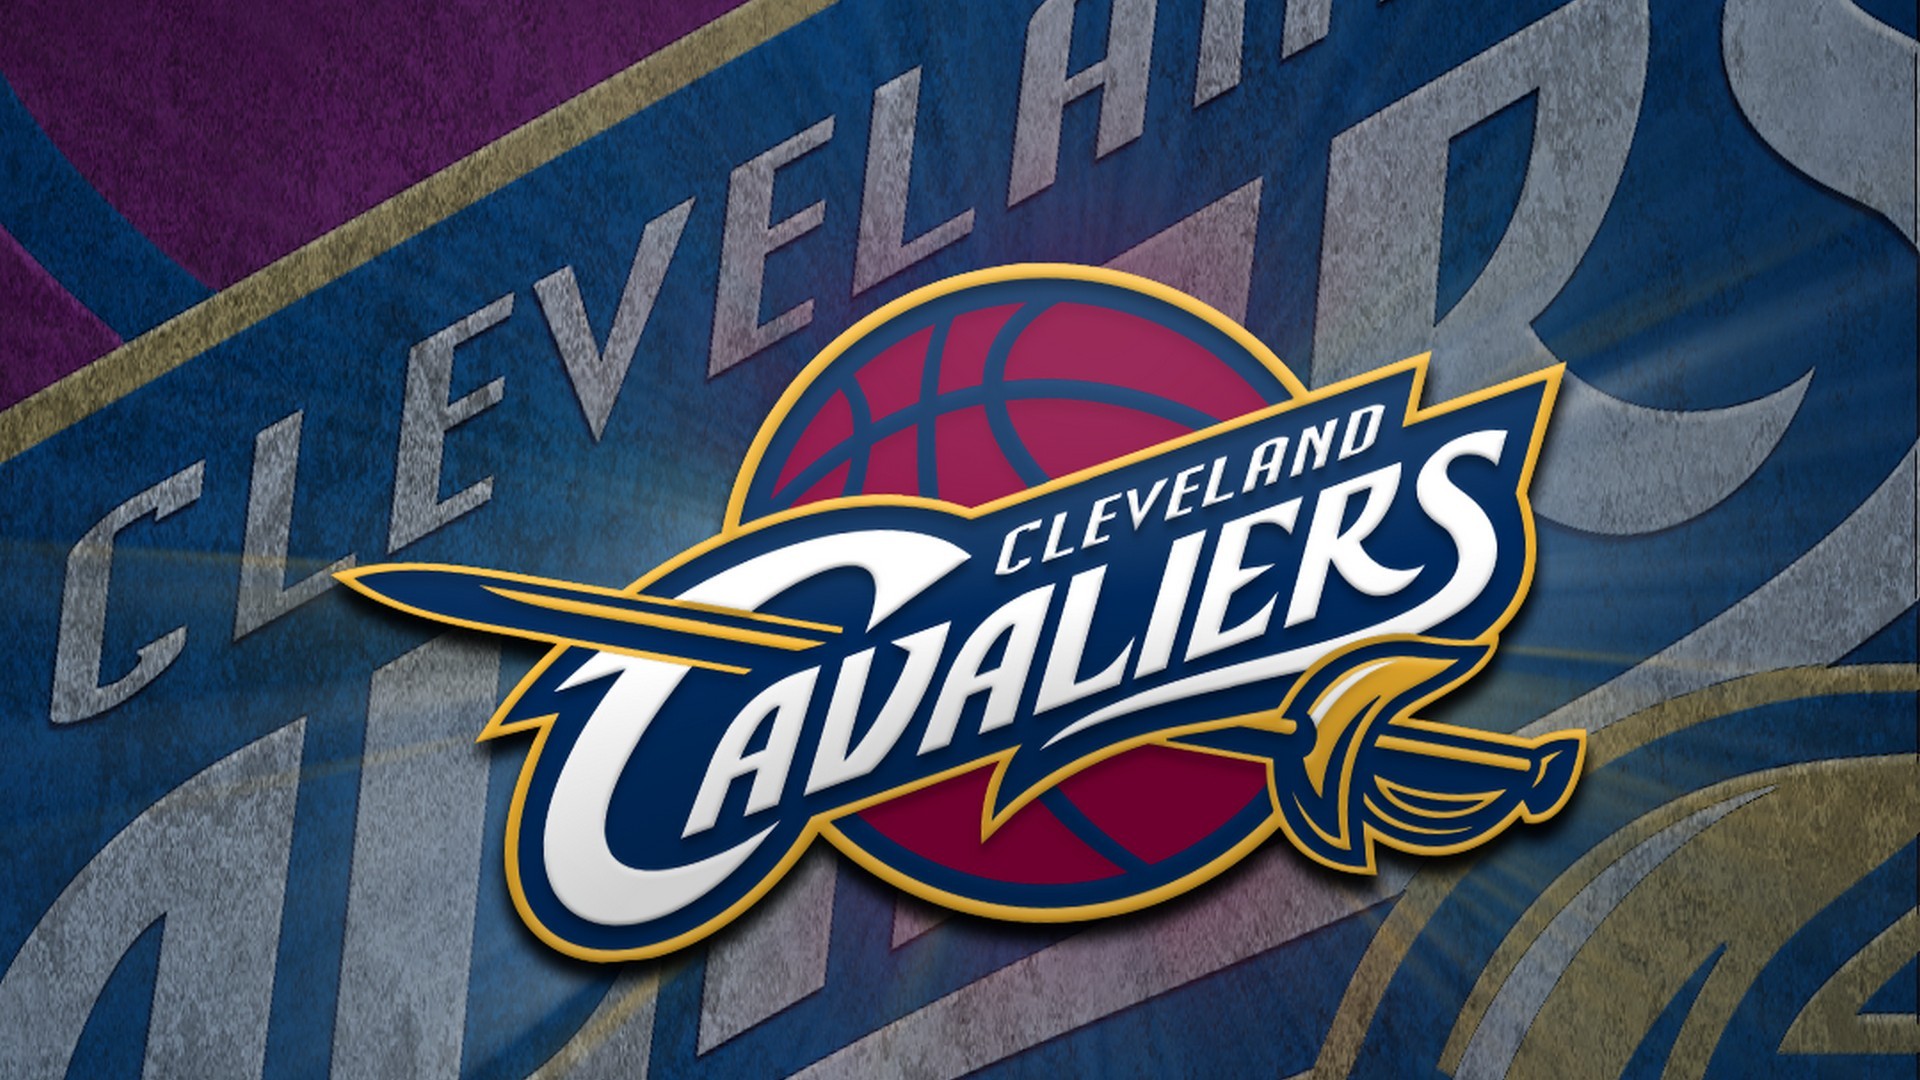 Cleveland Cavaliers Wallpaper For Mac Backgrounds With Resolution 1920X1080